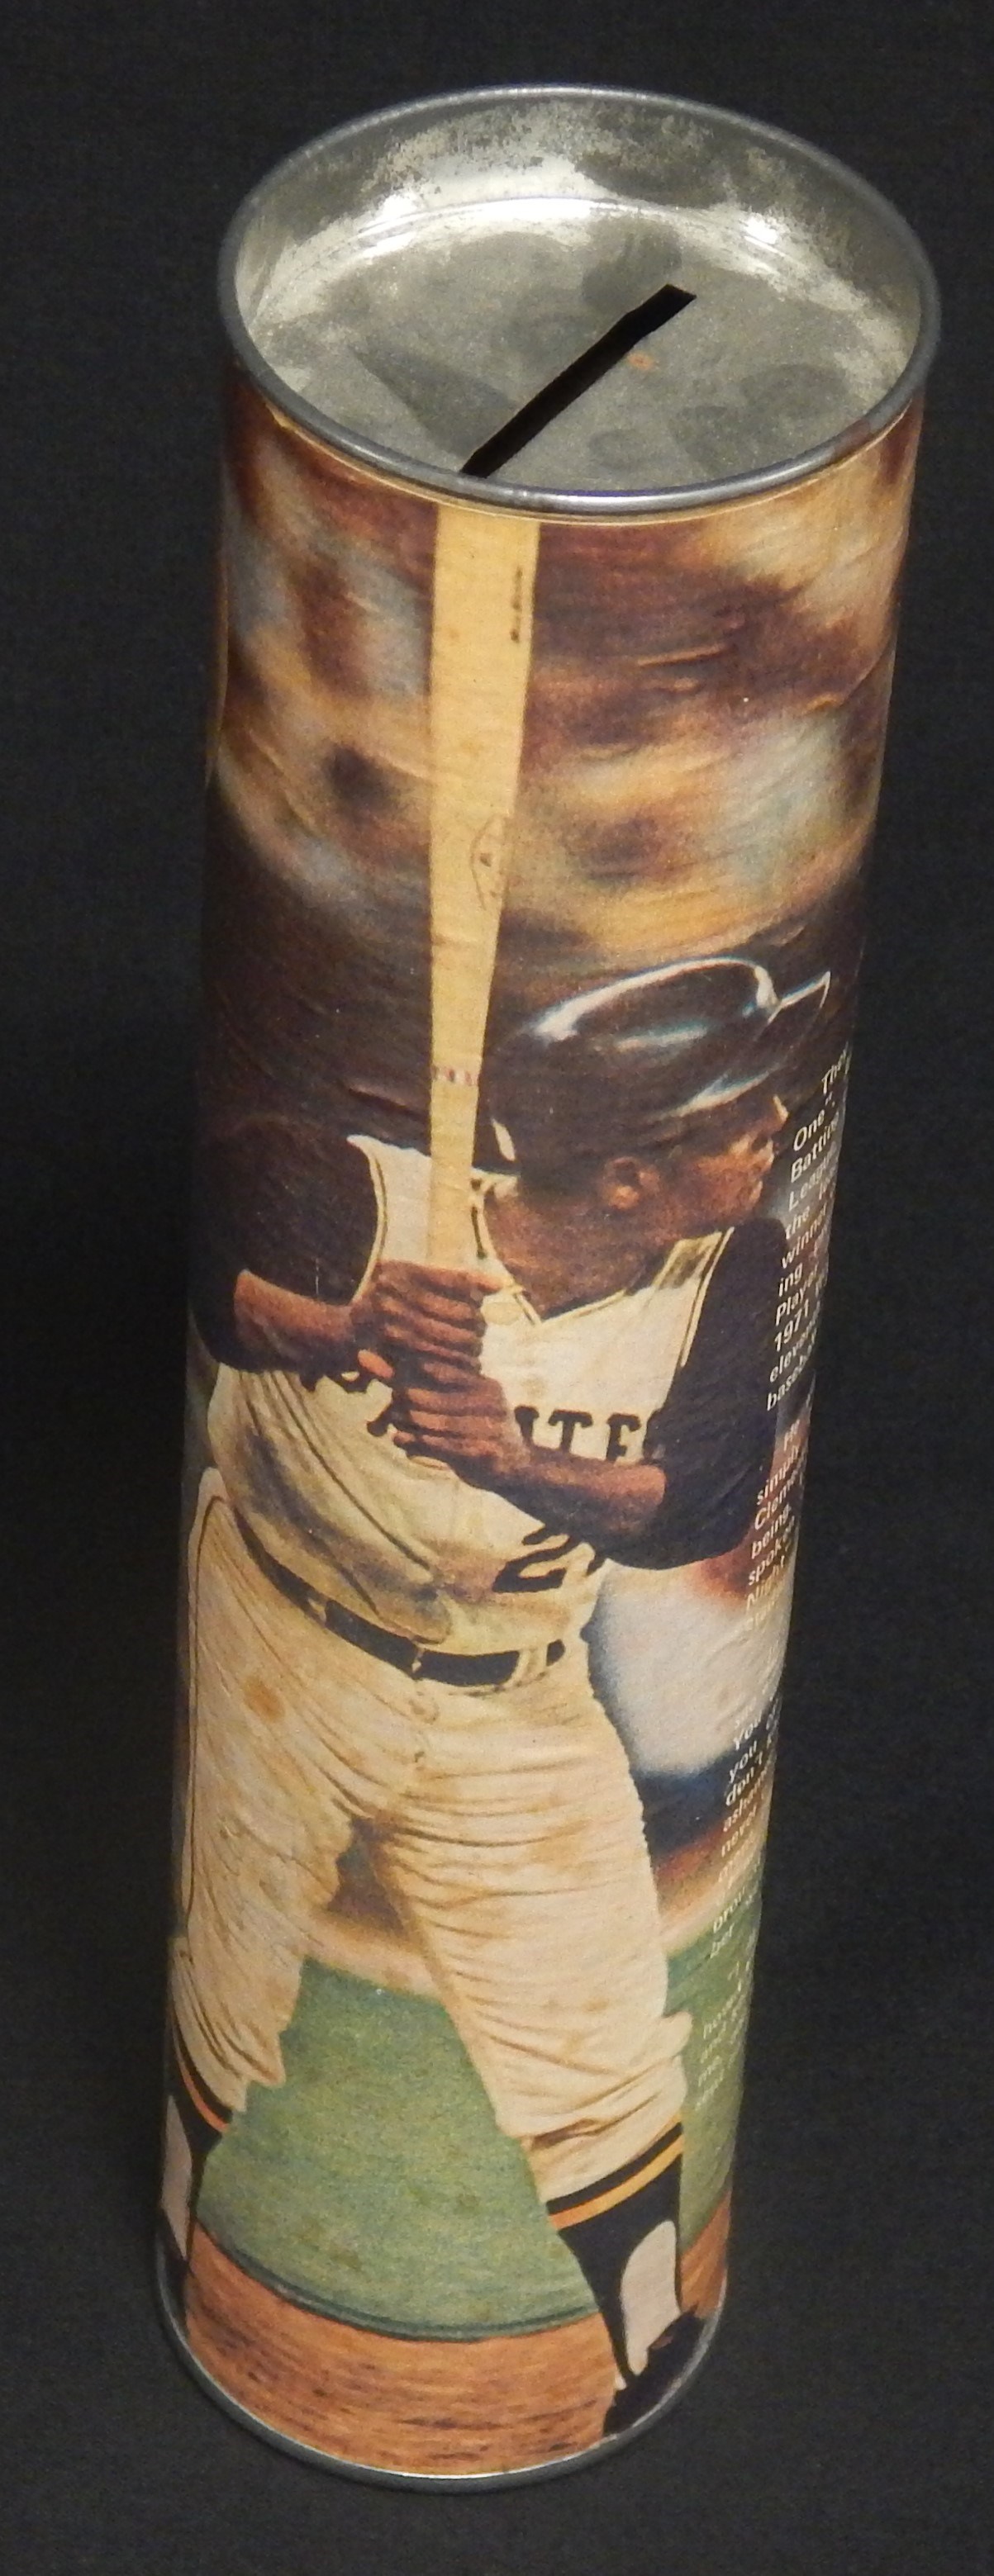 - Extremely Rare 1972 Roberto Clemente Candy Bank